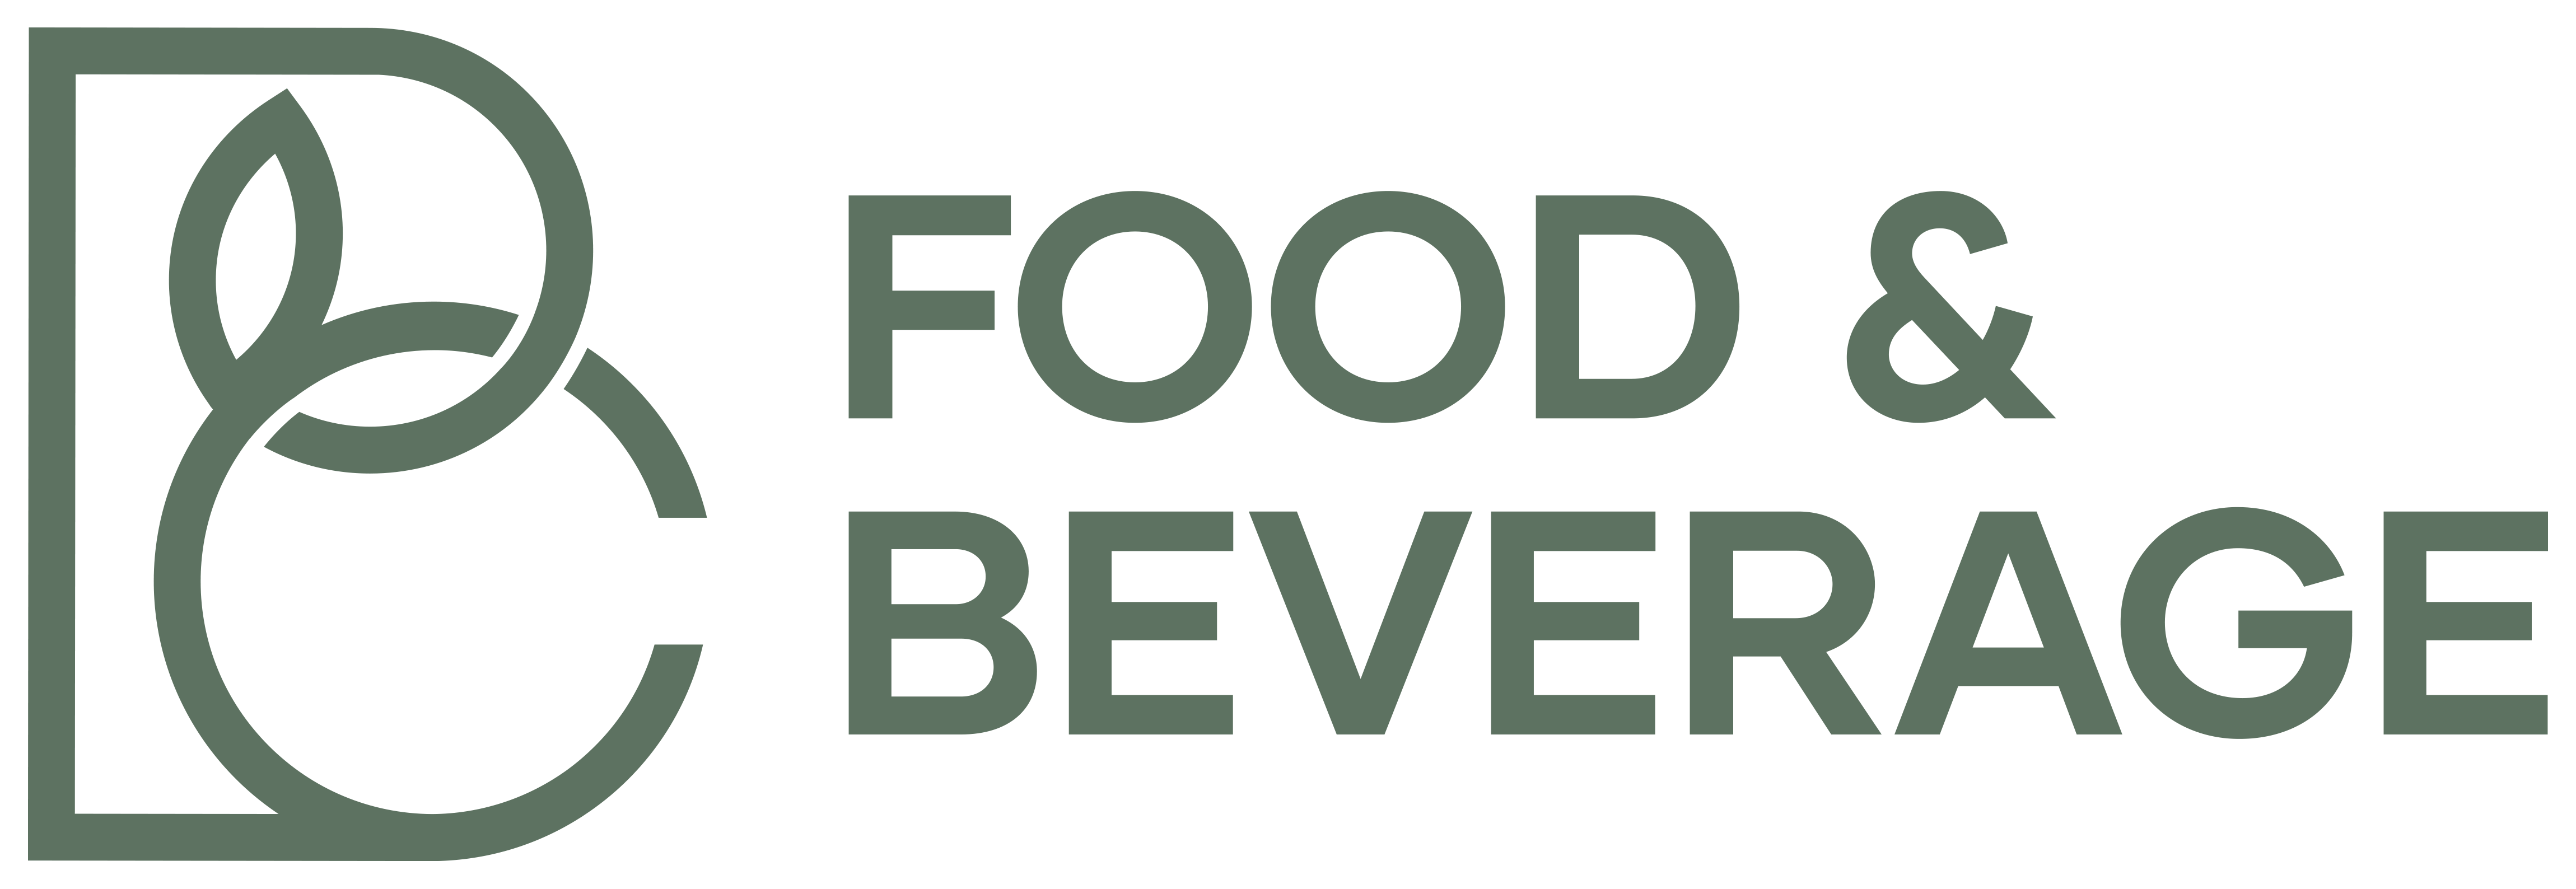 bc food and beverage